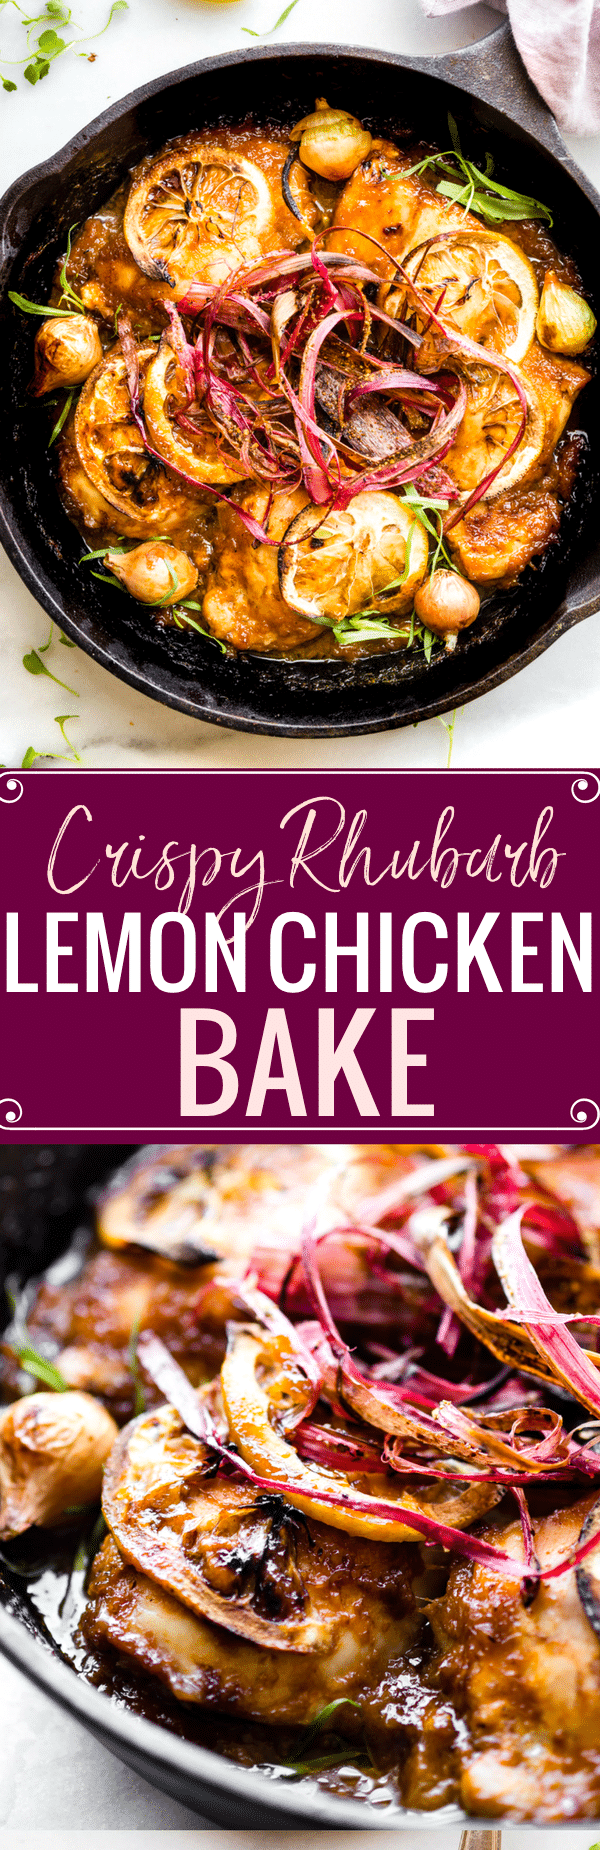 Crispy Rhubarb Lemon Chicken Bake! No boring chicken here ya'll! A tangy rhubarb marinade caramelizes the lemon chicken while baking. Then it's topped with crispy rhubarb shavings! www.cottercrunch.com A Paleo friendly simple dinner!